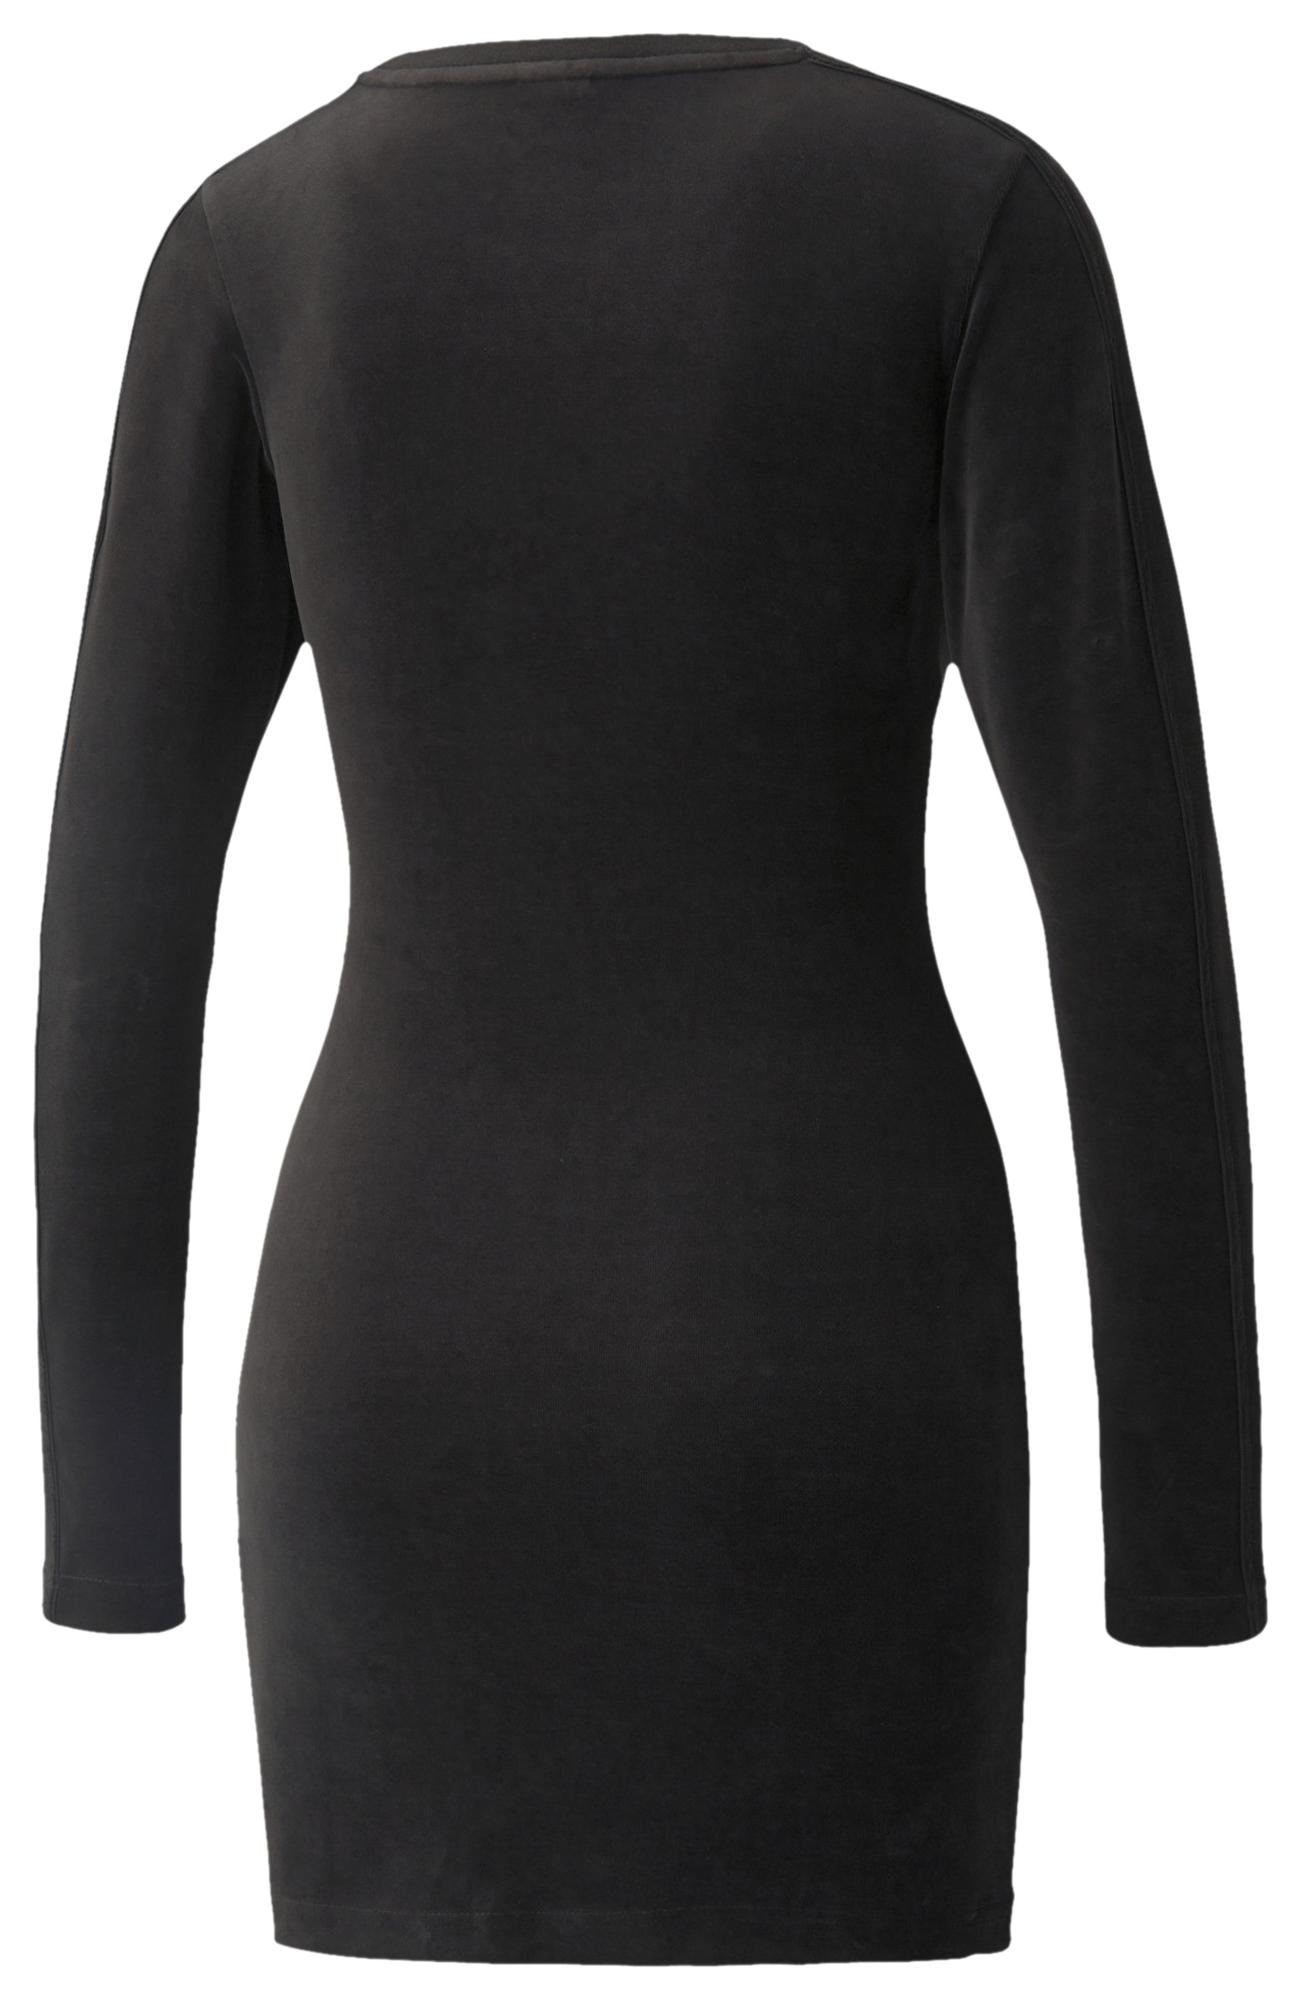 PUMA Iconic Velour Fitted Dress in Black/Black (Black) - Save 47 